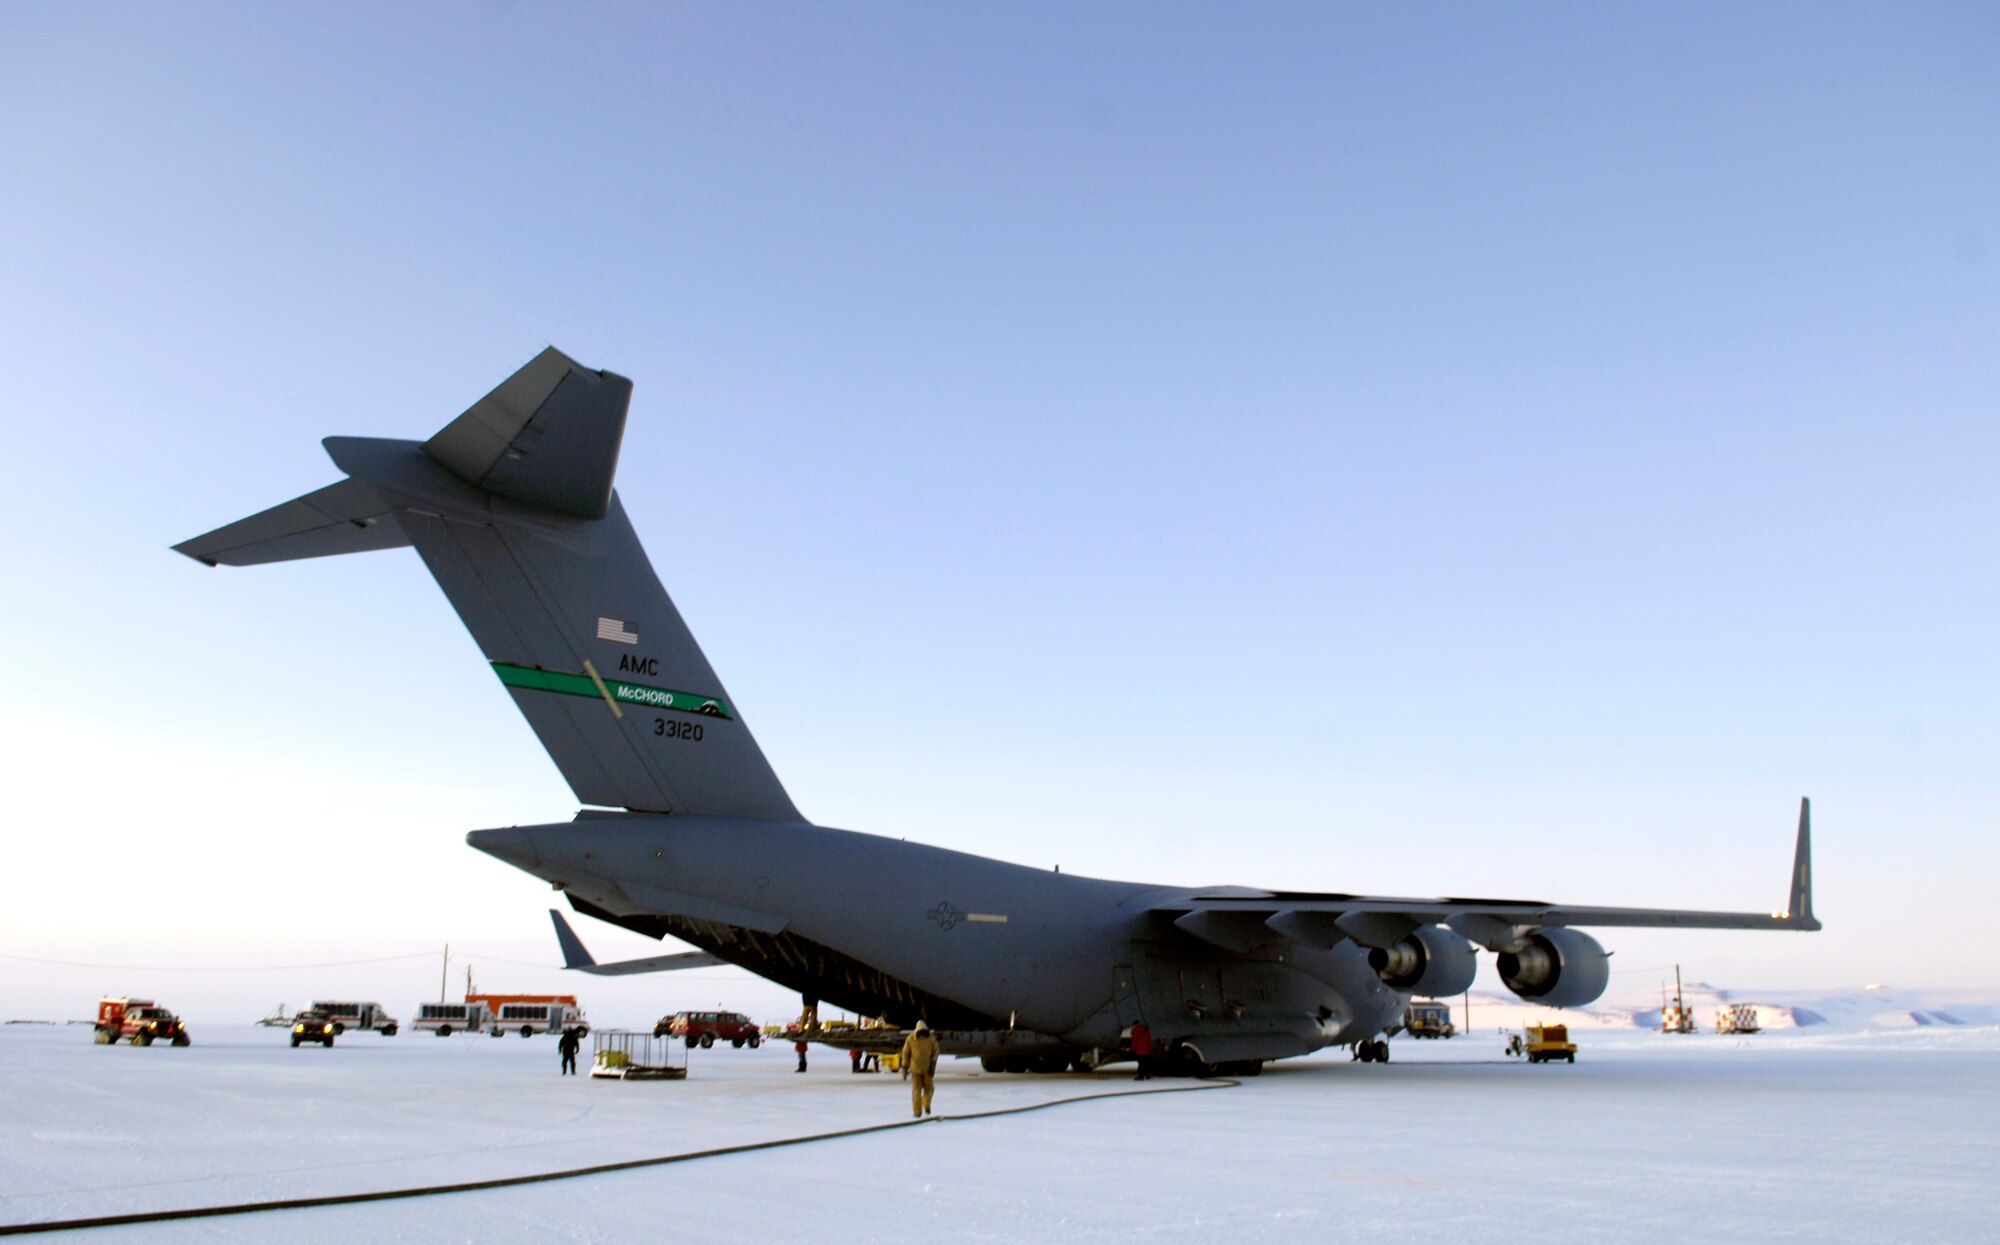 A C-17 Globemaster III downloads cargo and receives fuel at Pegasus White Ice Runway, Antarctica Aug. 25, 2007 during an Operation Deep Freeze winter fly-in mission. A C-17 and 31 Airmen from McChord Air Force Base, Wash. are conducting the annual winter fly-in augmentation of scientist, support personnel, food and equipment for the U.S. Antarctic Program at McMurdo Station, Antarctica. WinFly is the opening of the first flights to McMurdo station, which closed for the austral winter in Feb. (U.S. Air Force photo/Tech. Sgt. Shane A. Cuomo)